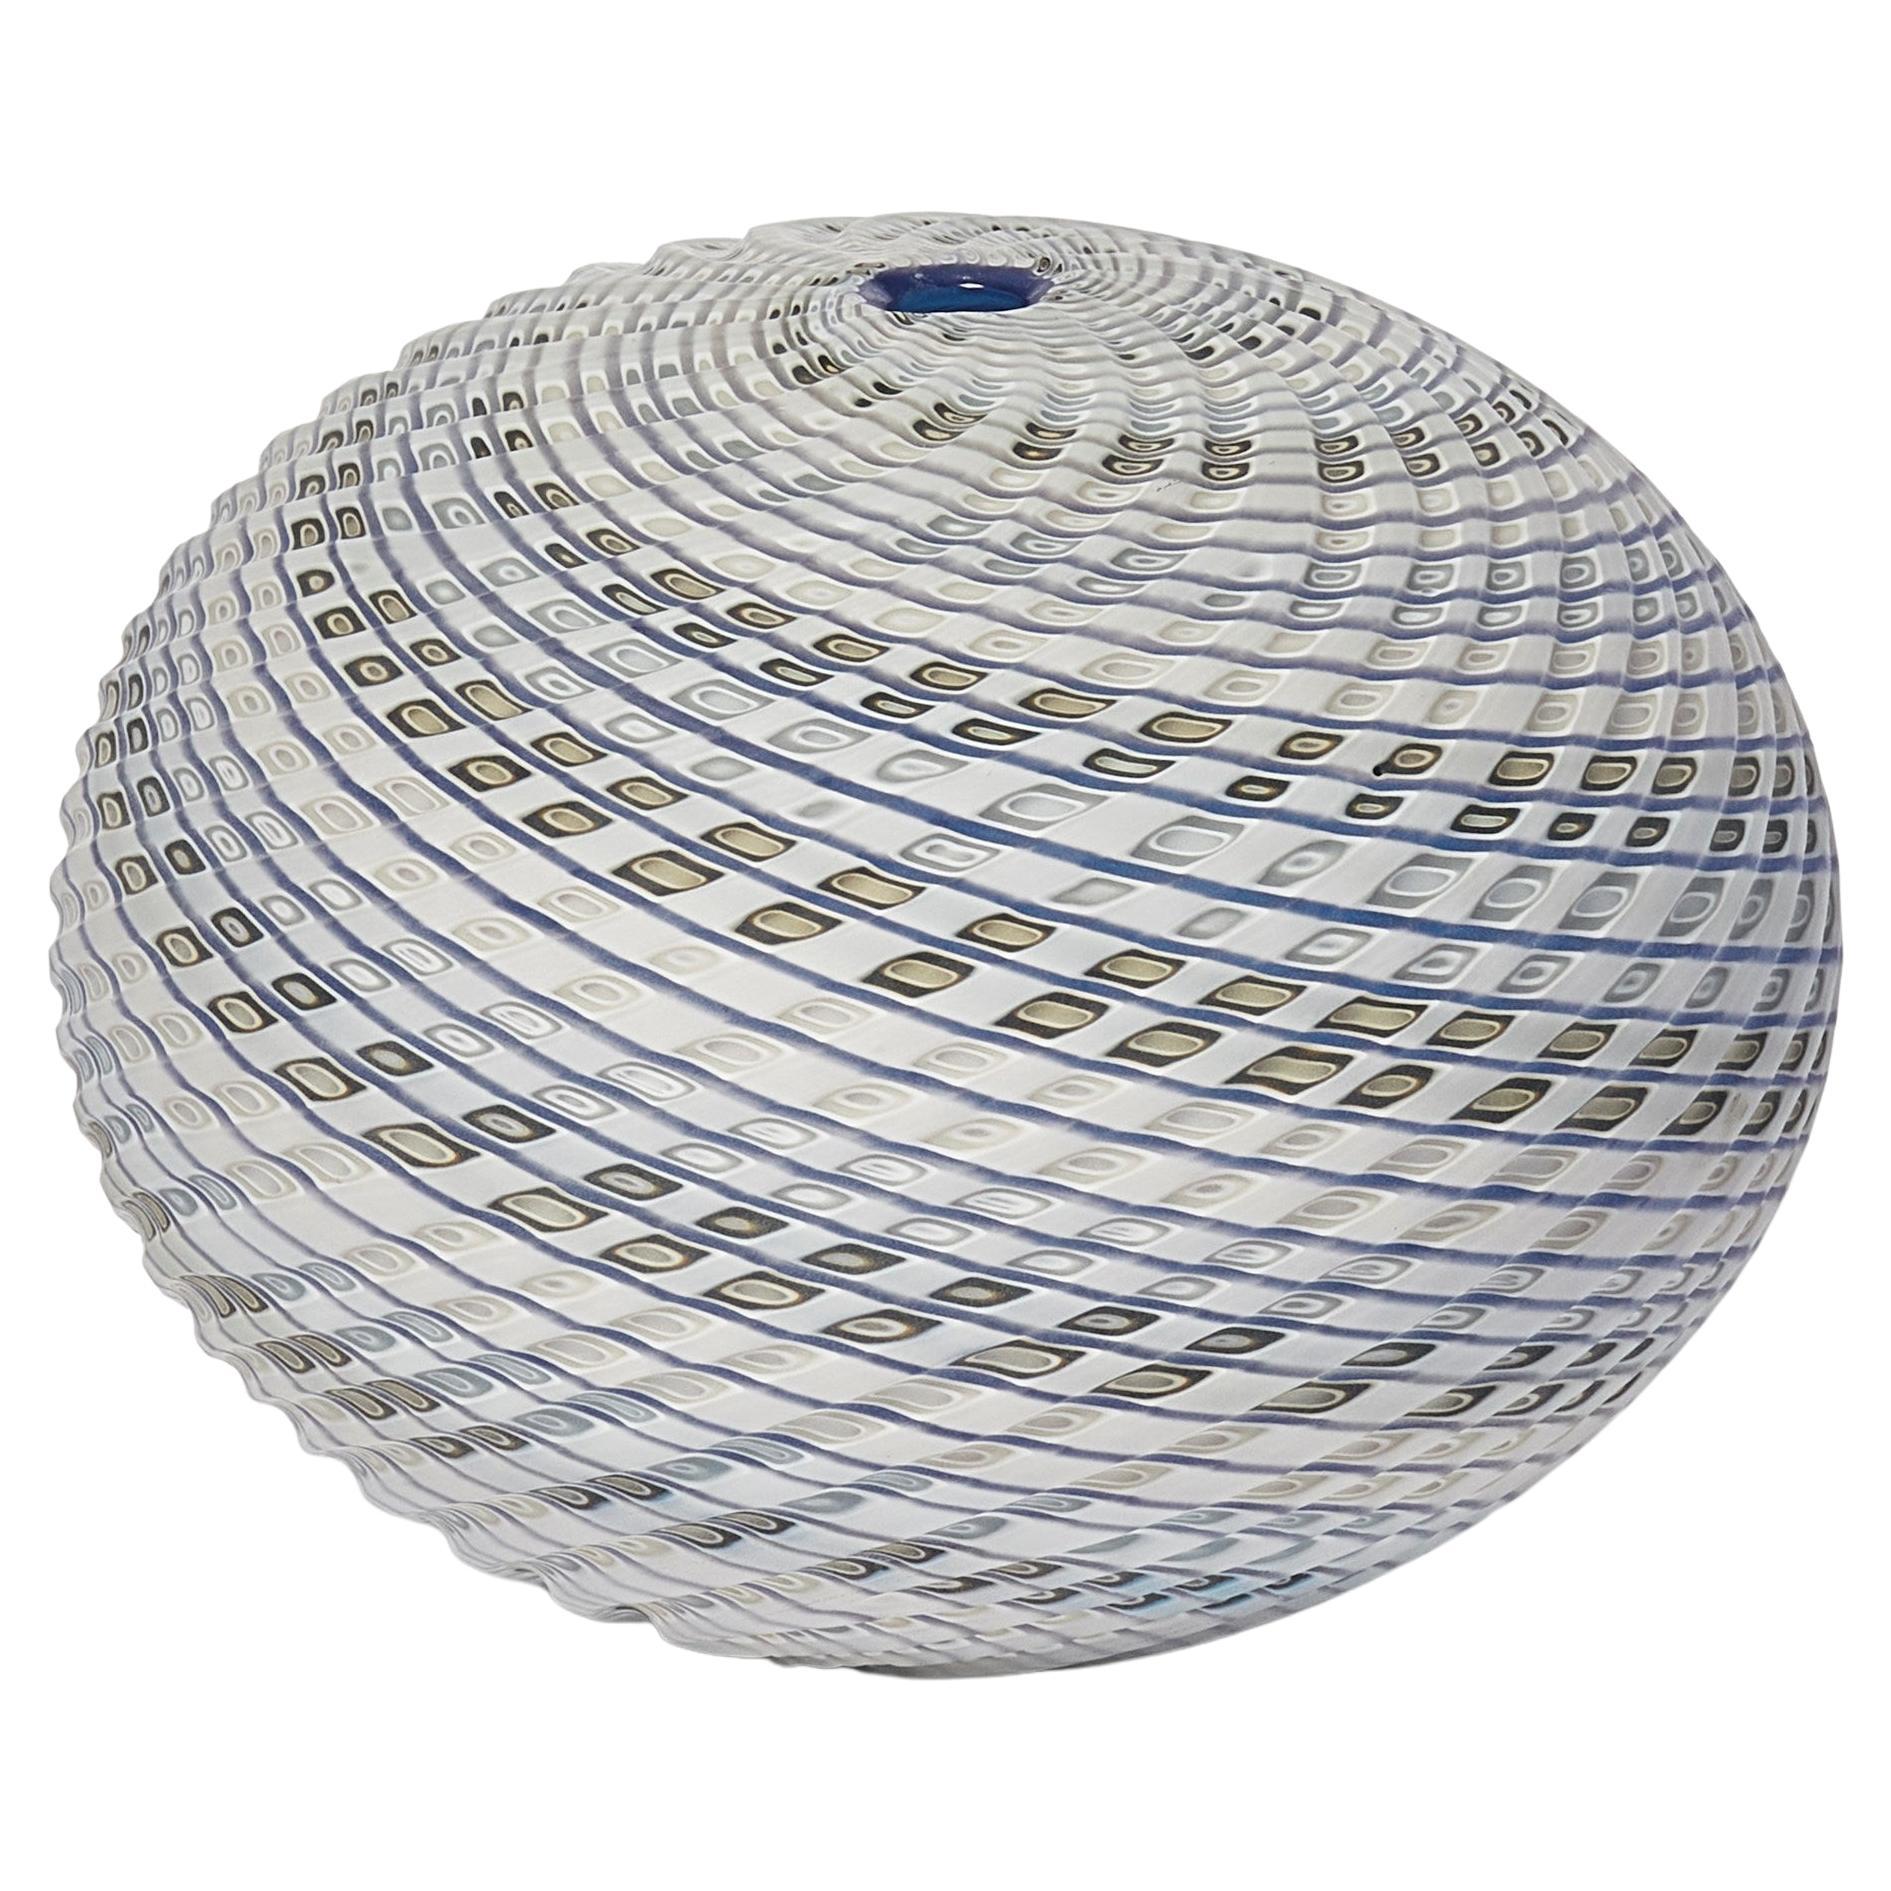 Woven Three Tone Blue Round, textured glass sculptural object by Layne Rowe For Sale